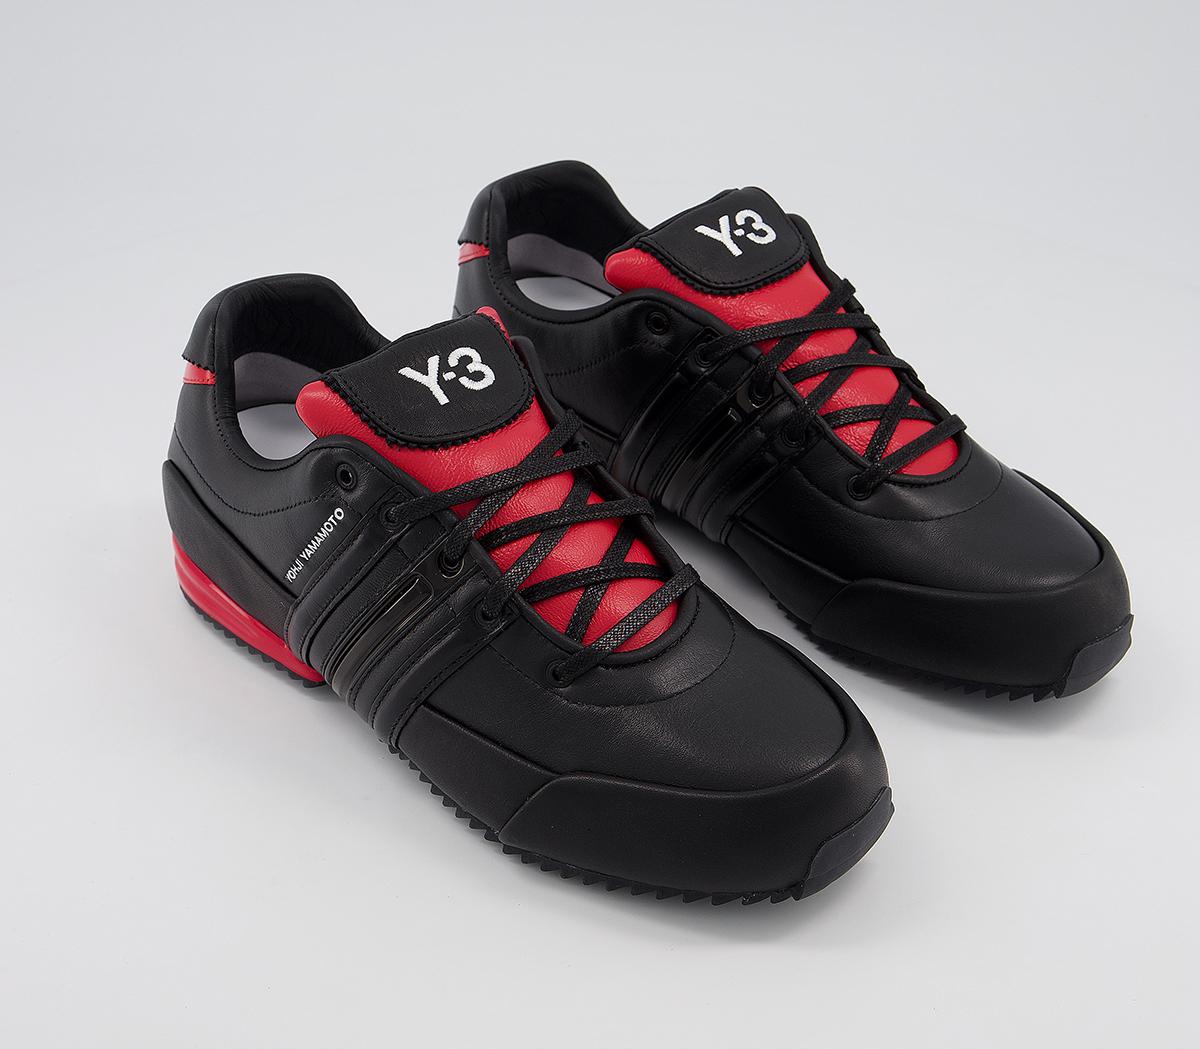 adidas Y3 Y3 Sprint Trainers Black Red His trainers